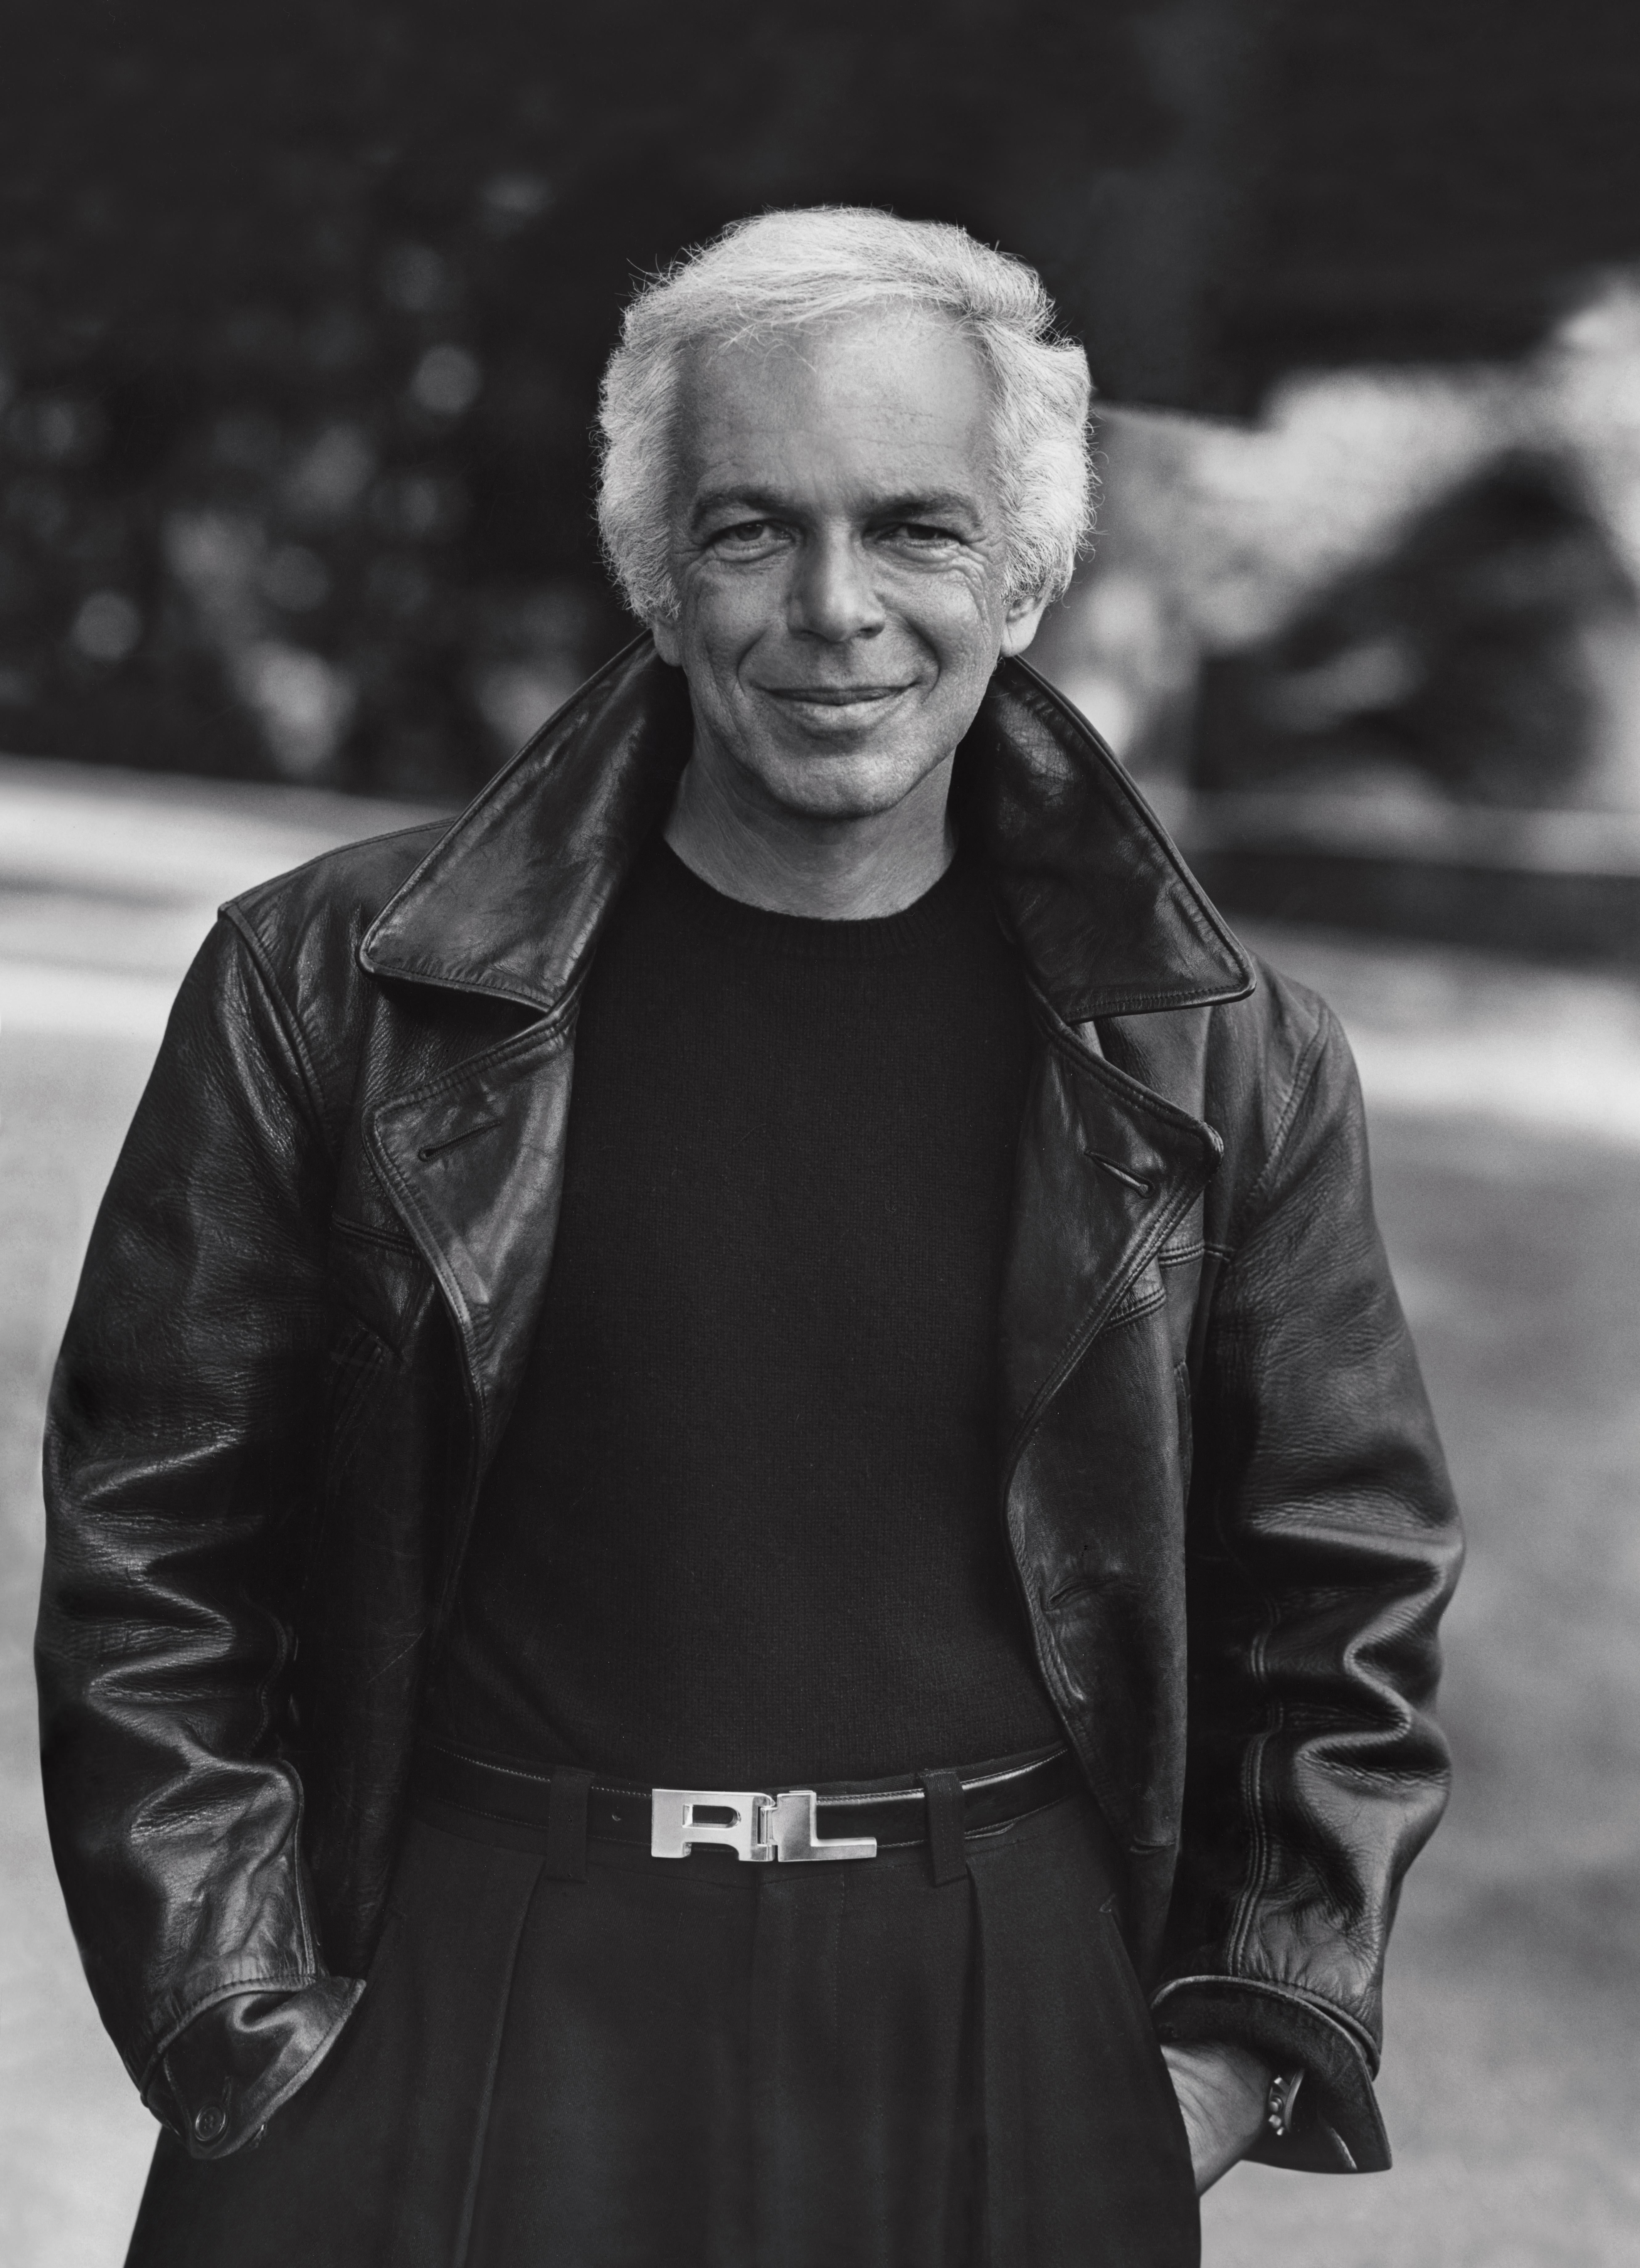 Ralph Lauren: Revised and Expanded Anniversary Edition
Author Ralph Lauren, Foreword by Audrey Hepburn

The landmark volume celebrating the life and work of Ralph Lauren—the vision of the brand as told and presented by Lauren himself—in a smaller,